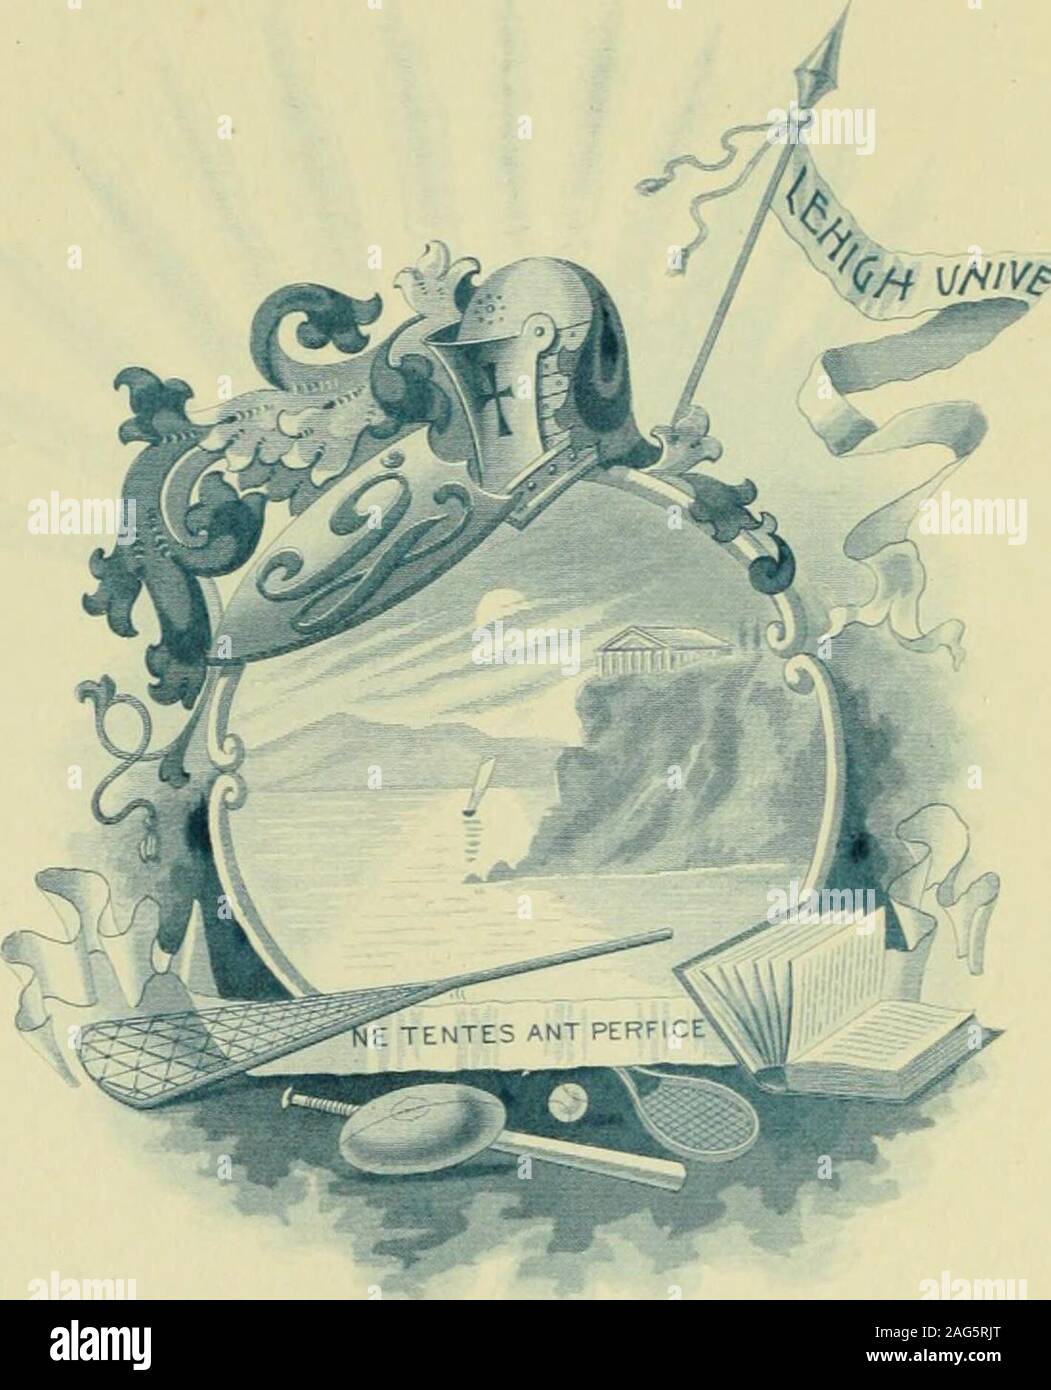 . Epitome: Yearbook 1896. our future life at Lehigh be as full ofpleasure as our past has been. Historian. 48. F^ .! /IBotto:Ne Tentes Aut Ferfice. Class Ucll. Boom Rah ! Boom Ri ! 98! Lehigh ! Class Colors:Navy Blue and Old Gold. Officers. Theodore Benjamin Wood, Jr.,Stuart John Gass, .Ralph Raymond Bowdle,Harry Packer Wilbur,Charles Edward Webster, Jr.,Carlos Hernaiz Becerra, President. Vice-President. Secretary. Treasurer. Historian. Athletic Representative. Harry L. Adams, X t,Llewellyn Allport,Thomas J. Anderson,William E. Arrison, i X,Alanson Q. Bailey, Course. Residence. C.E., Xt House Stock Photo